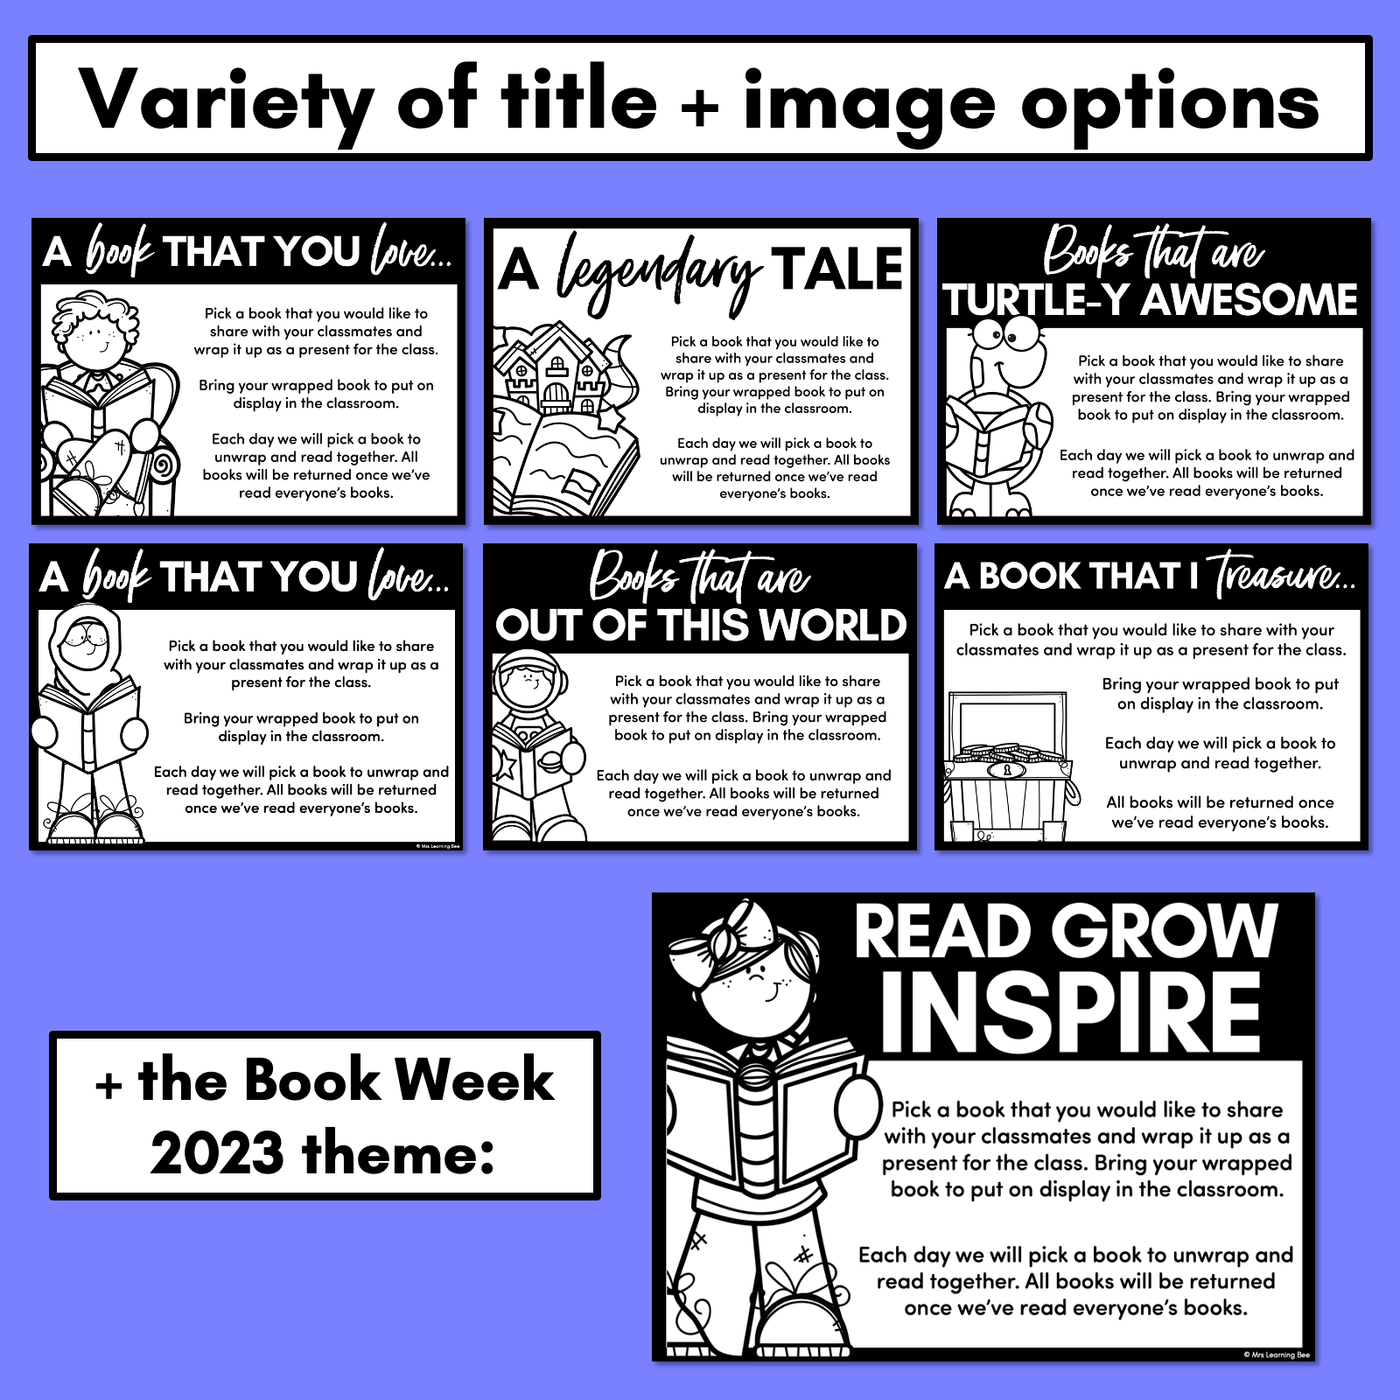 WRAP A STORY BOOK - Book Week or Start/End of Year Classroom Book Activity